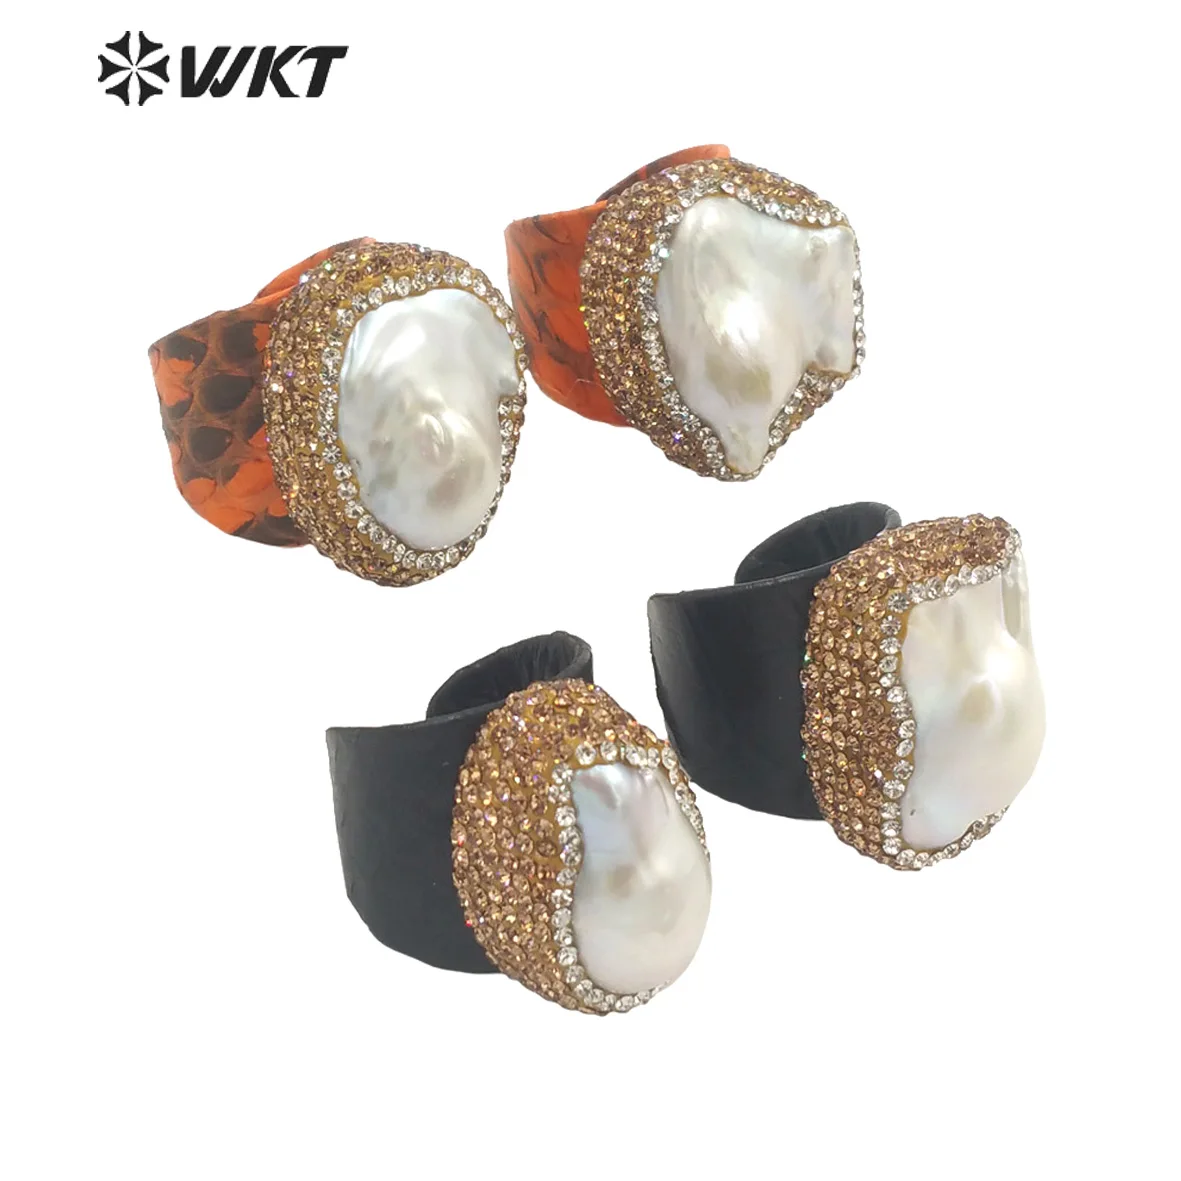 

WT-MPR040 WKT 2022 Attractive Style Baroque Pearl&RhineStone&Genuine Leather Finger Ring Gold-Plate Fashion Ring